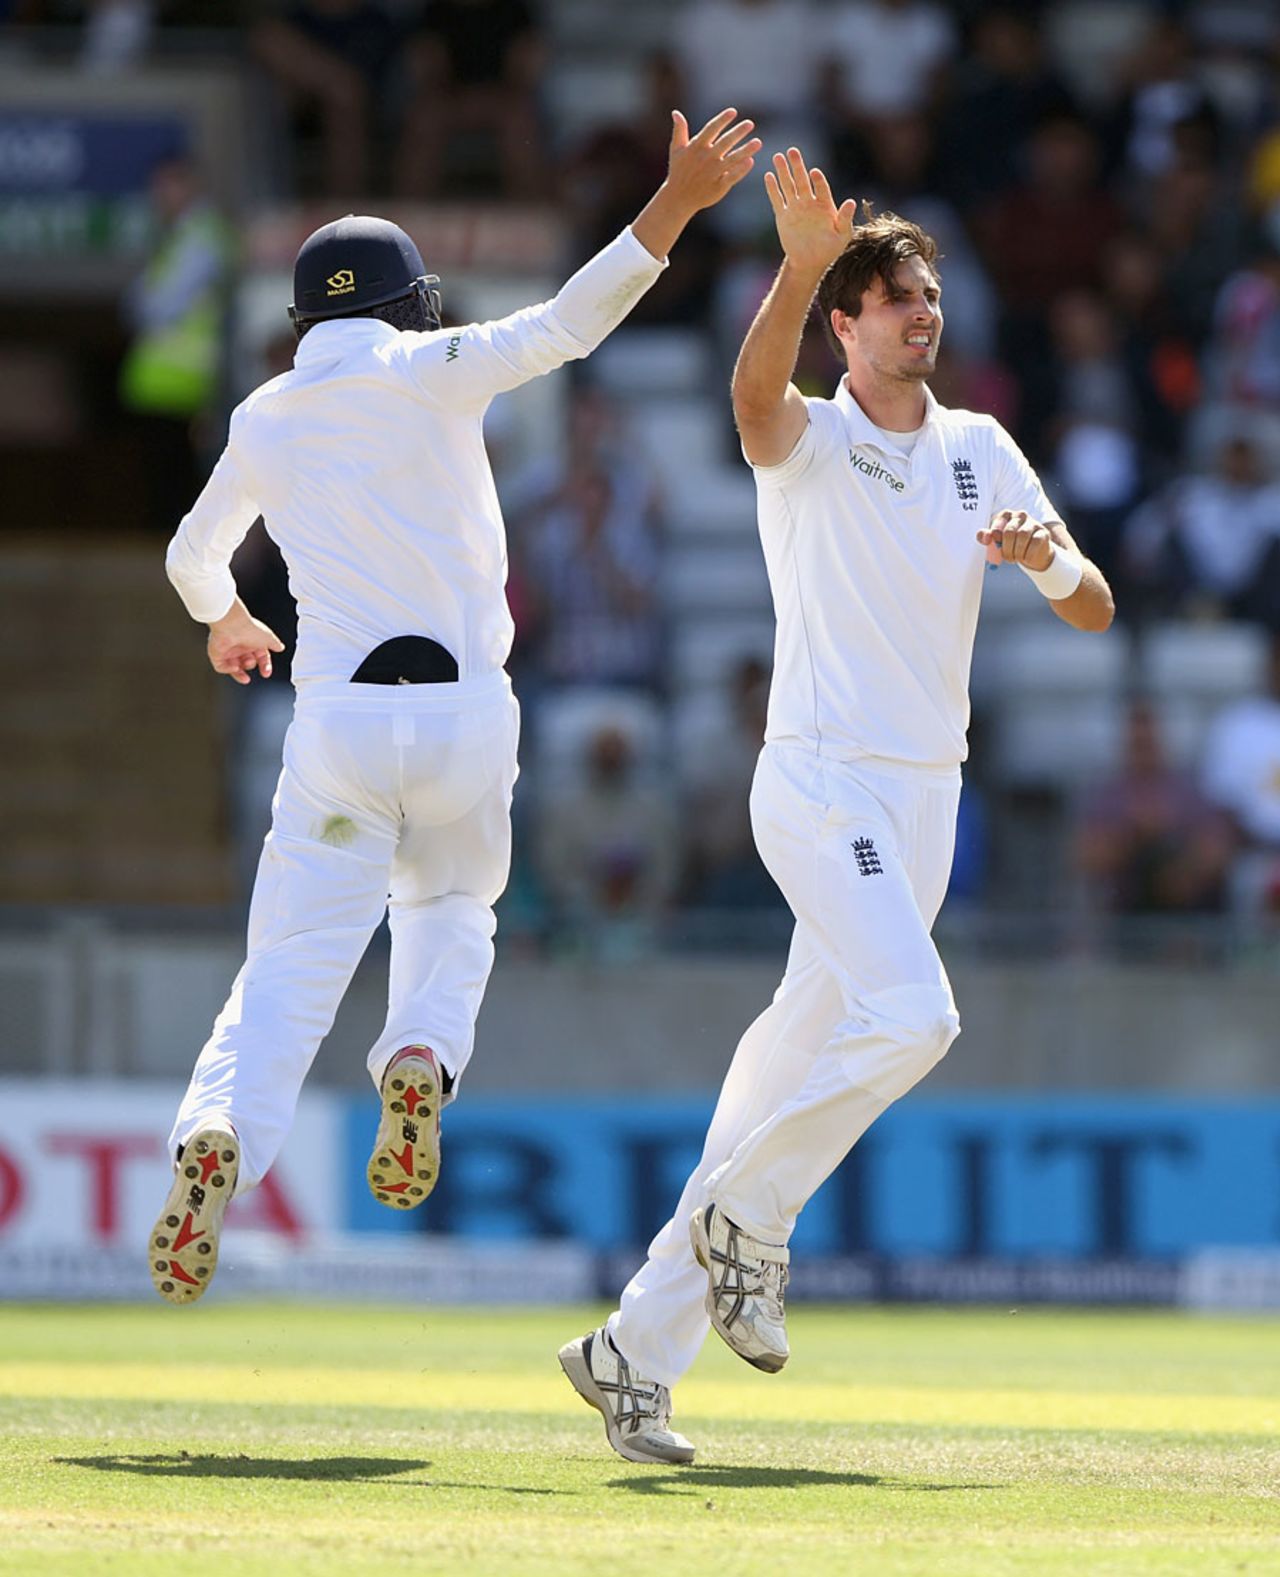 Steven Finn had waited a while to be high-fived for a wicket, England v Pakistan, 3rd Investec Test, Edgbaston, 5th day, August 7, 2016